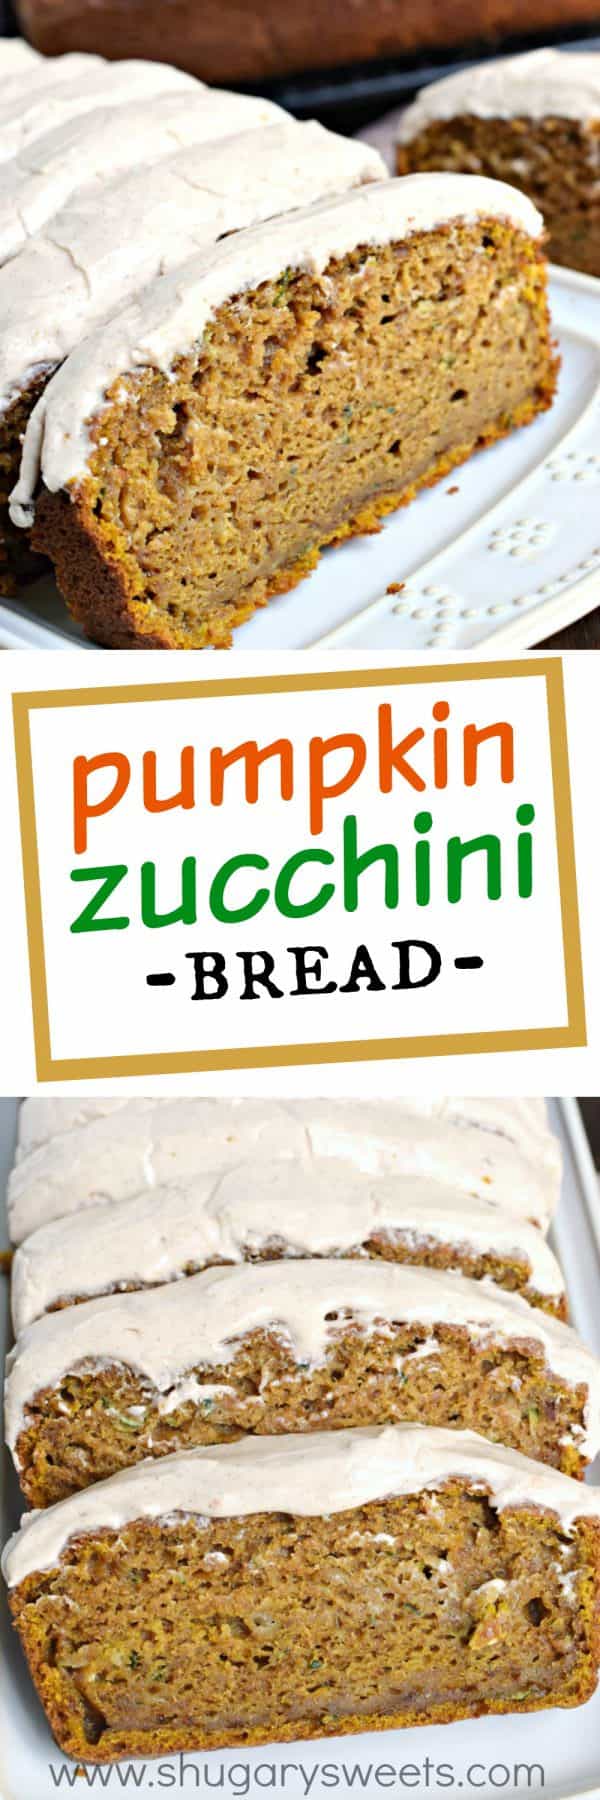 Pumpkin Zucchini Bread is an incredibly moist, flavorful treat topped with a cinnamon cream cheese frosting! Makes TWO freezer friendly loaves!